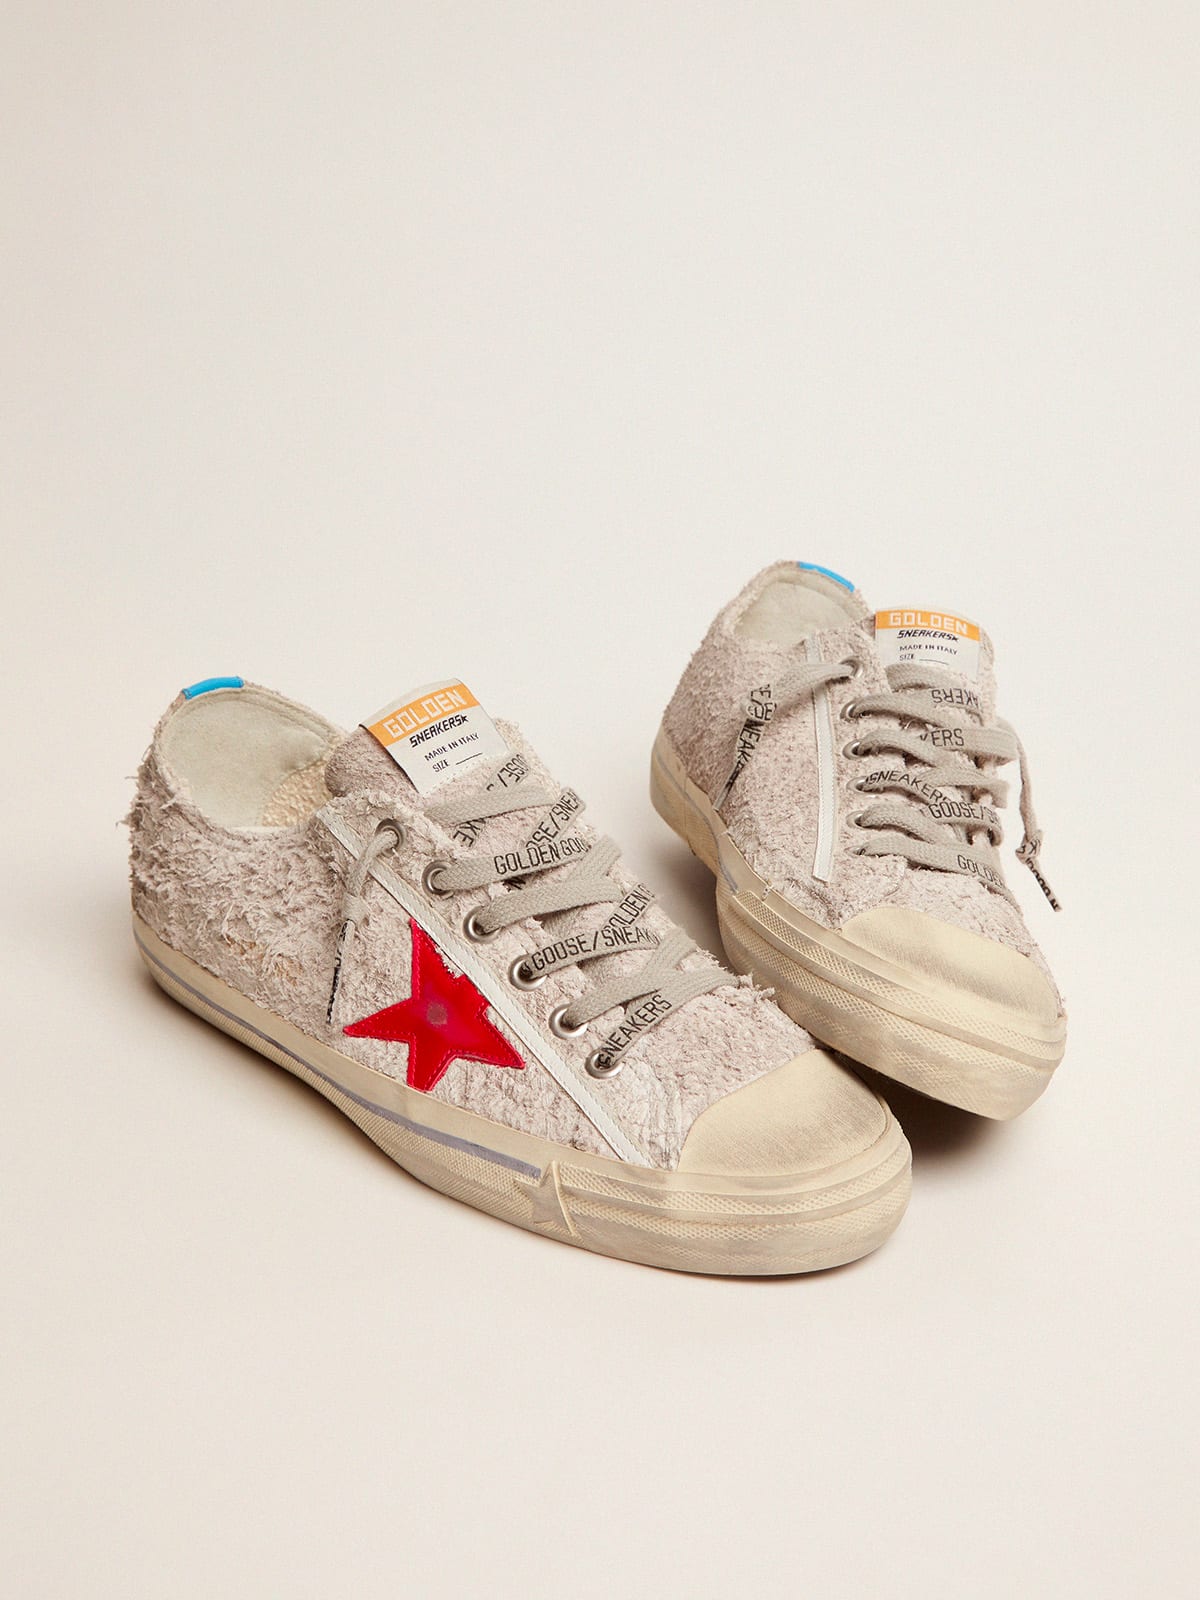 Golden Goose - V-Star sneakers in white suede with red leather star in 